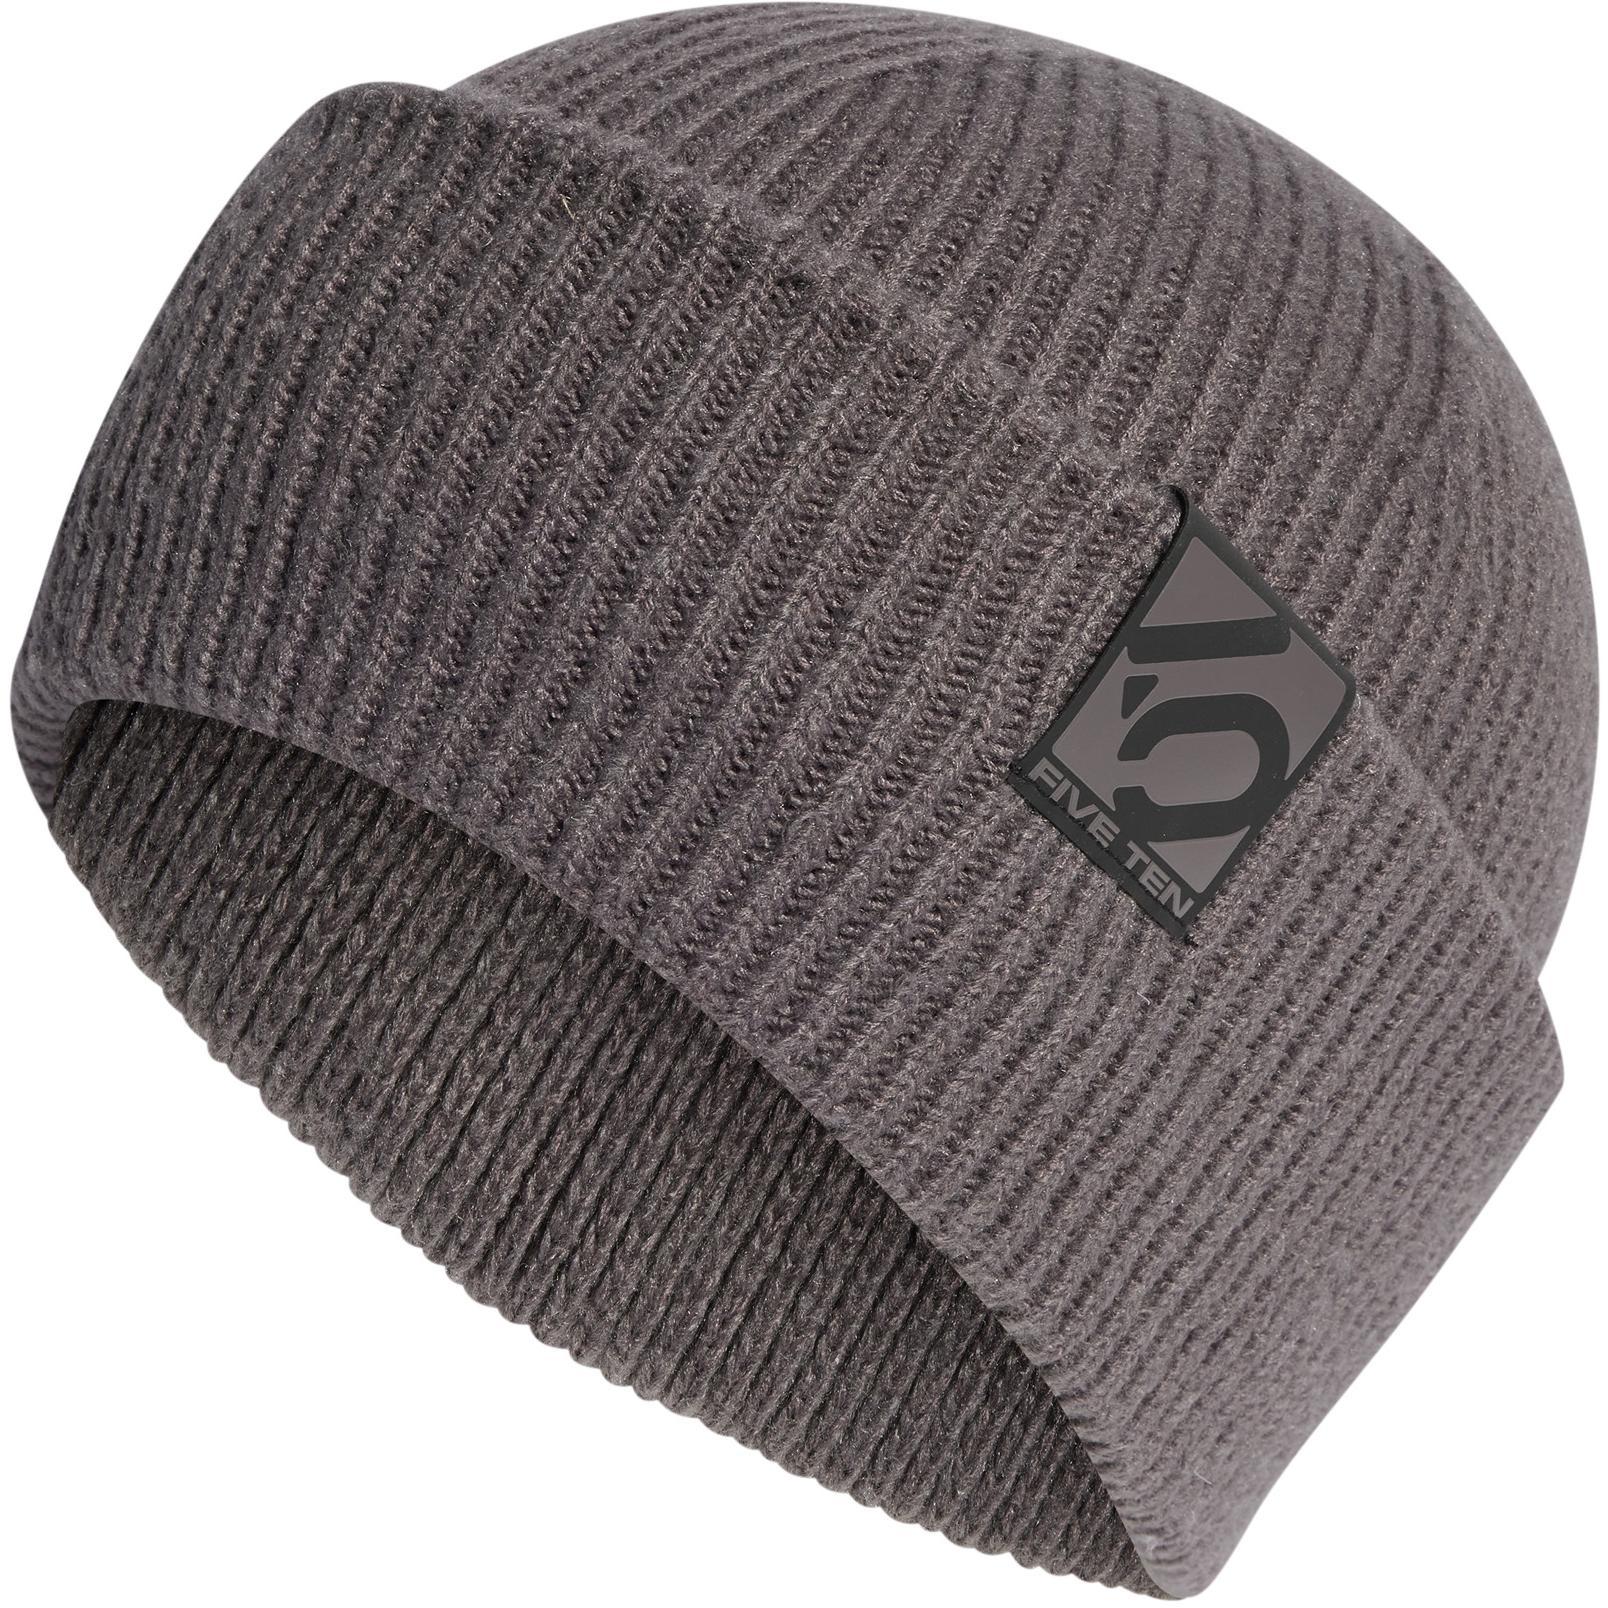 Image of Five Ten Beanie - Charcoal / Black / White / Red